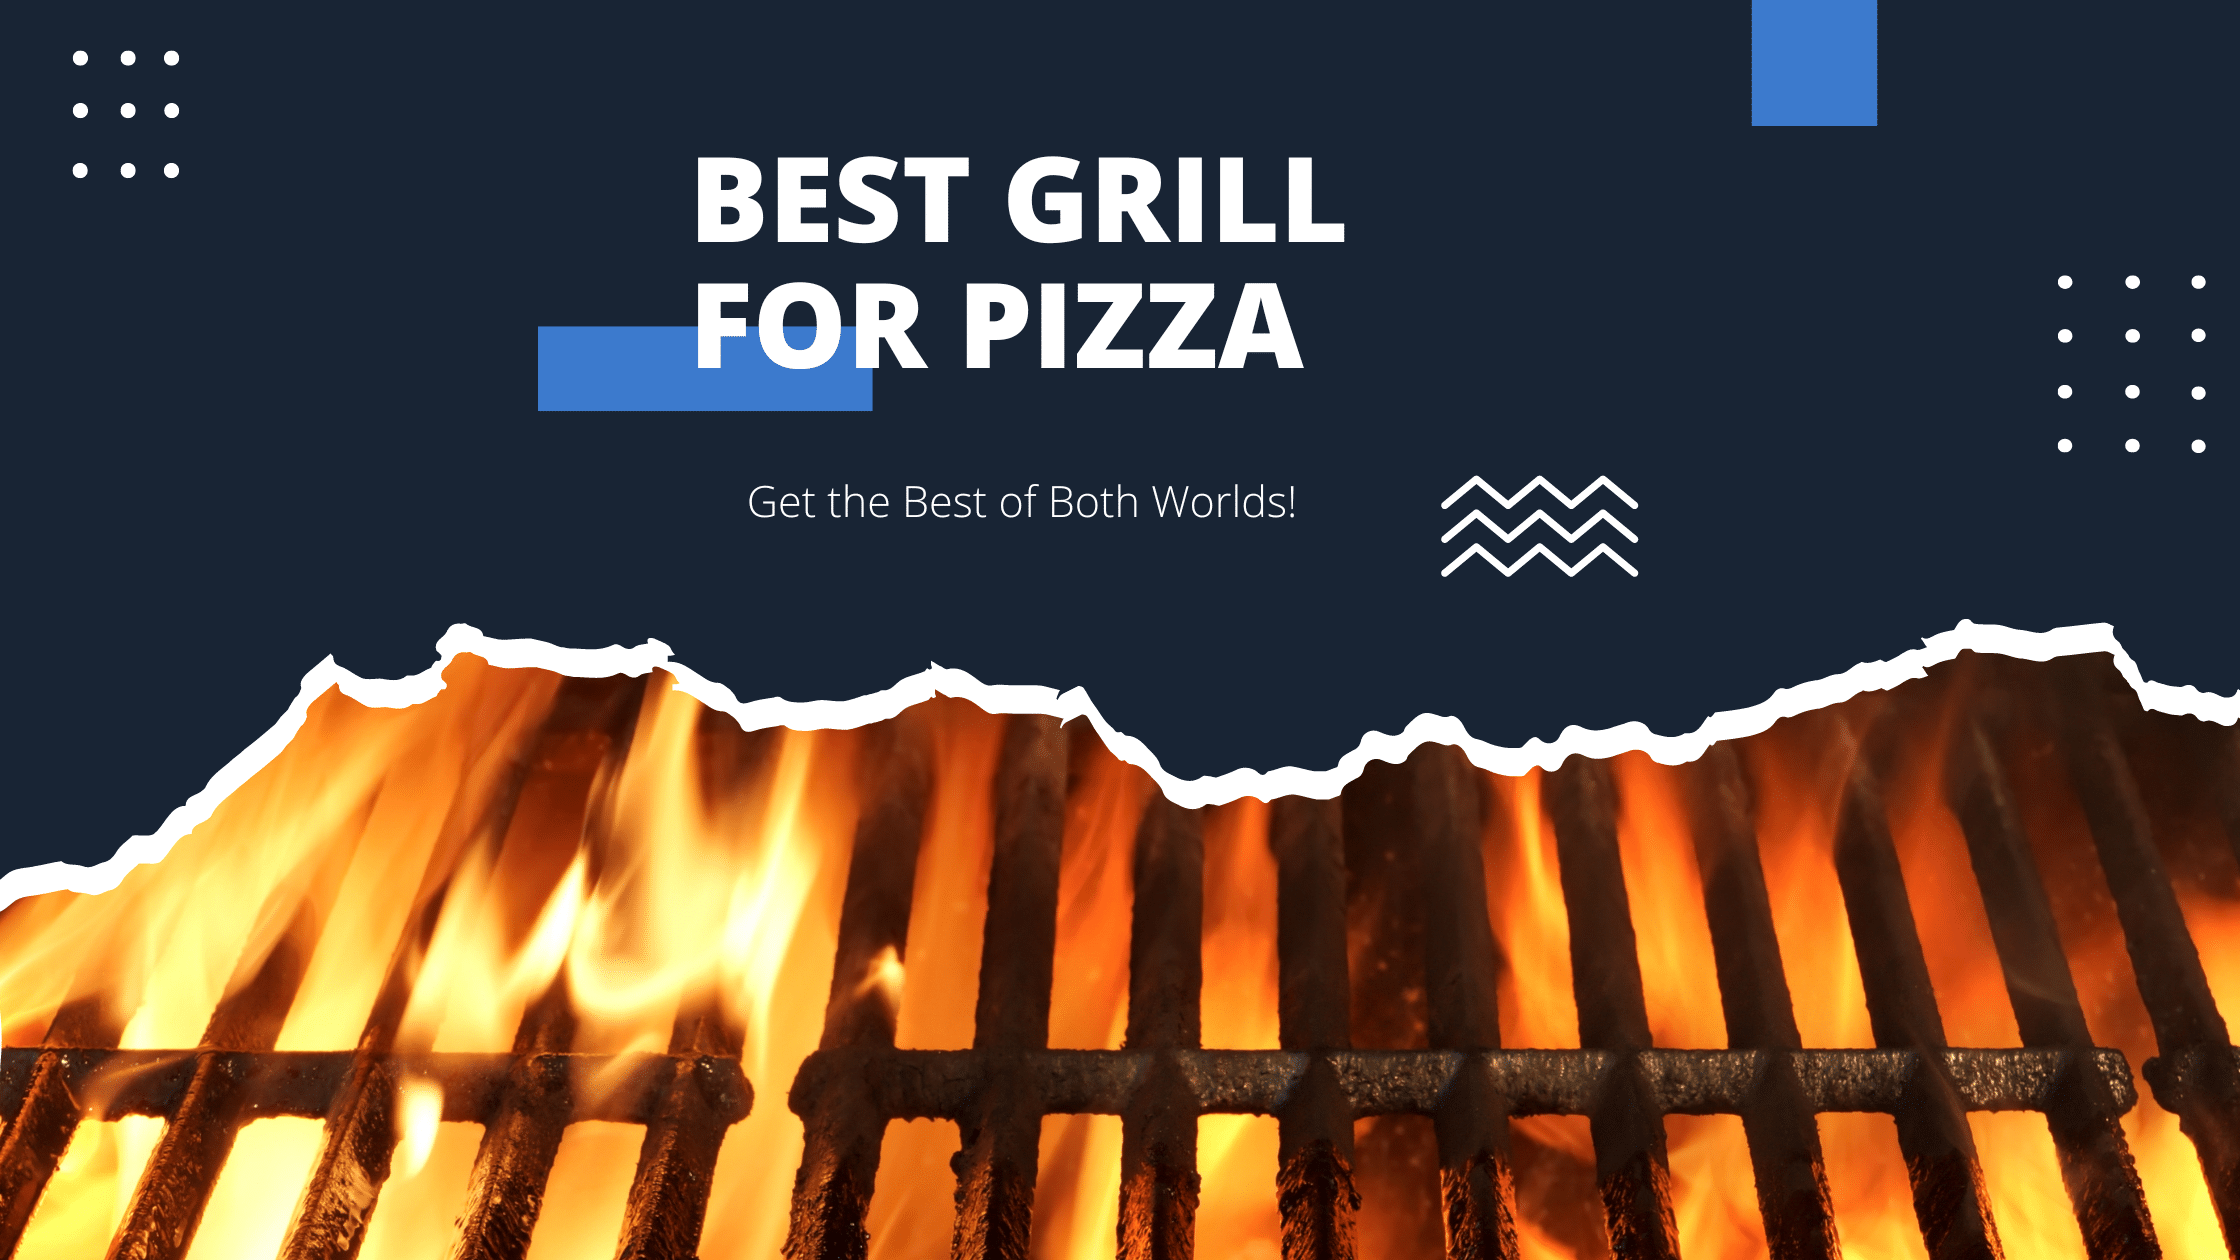 Grill for Pizza